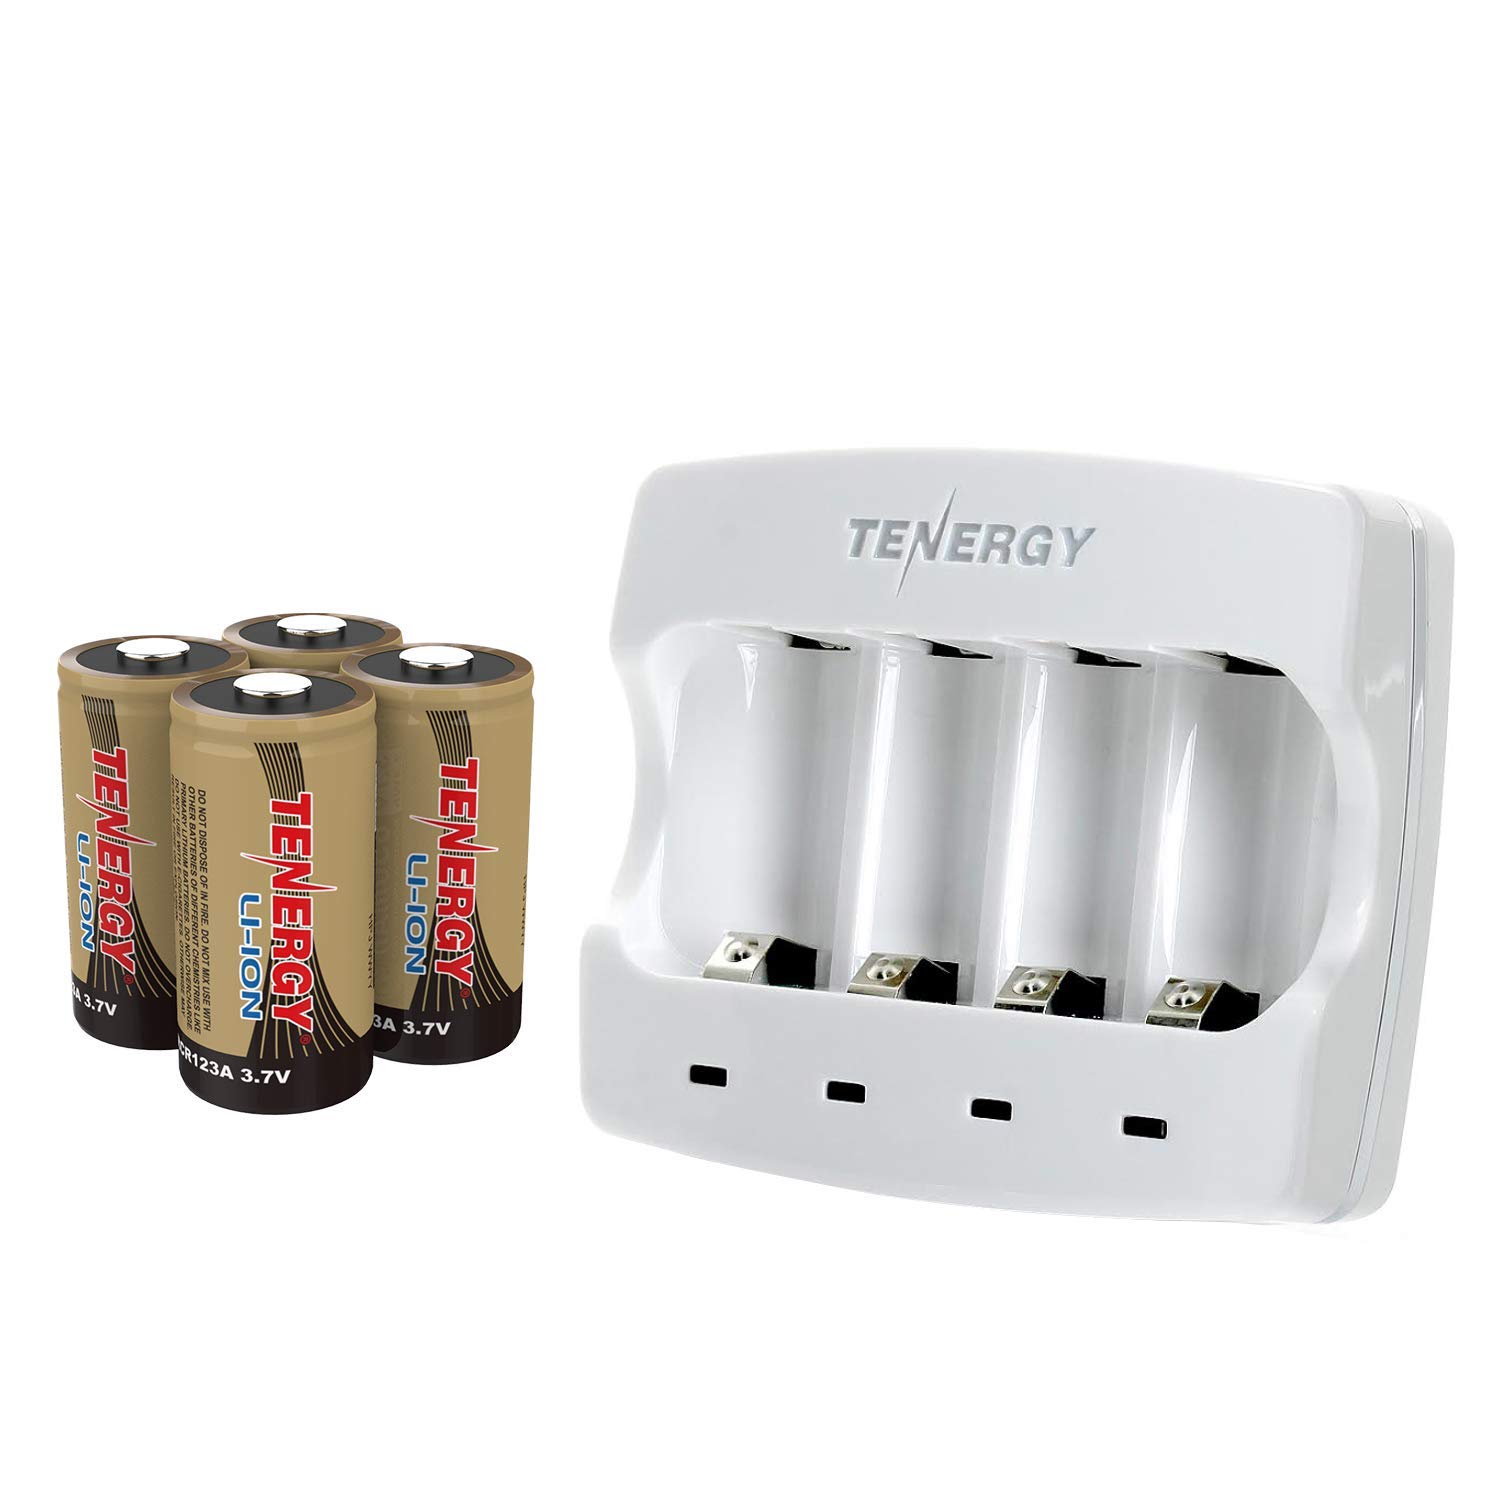 Battery Charger Tenergy G2plus User Manual